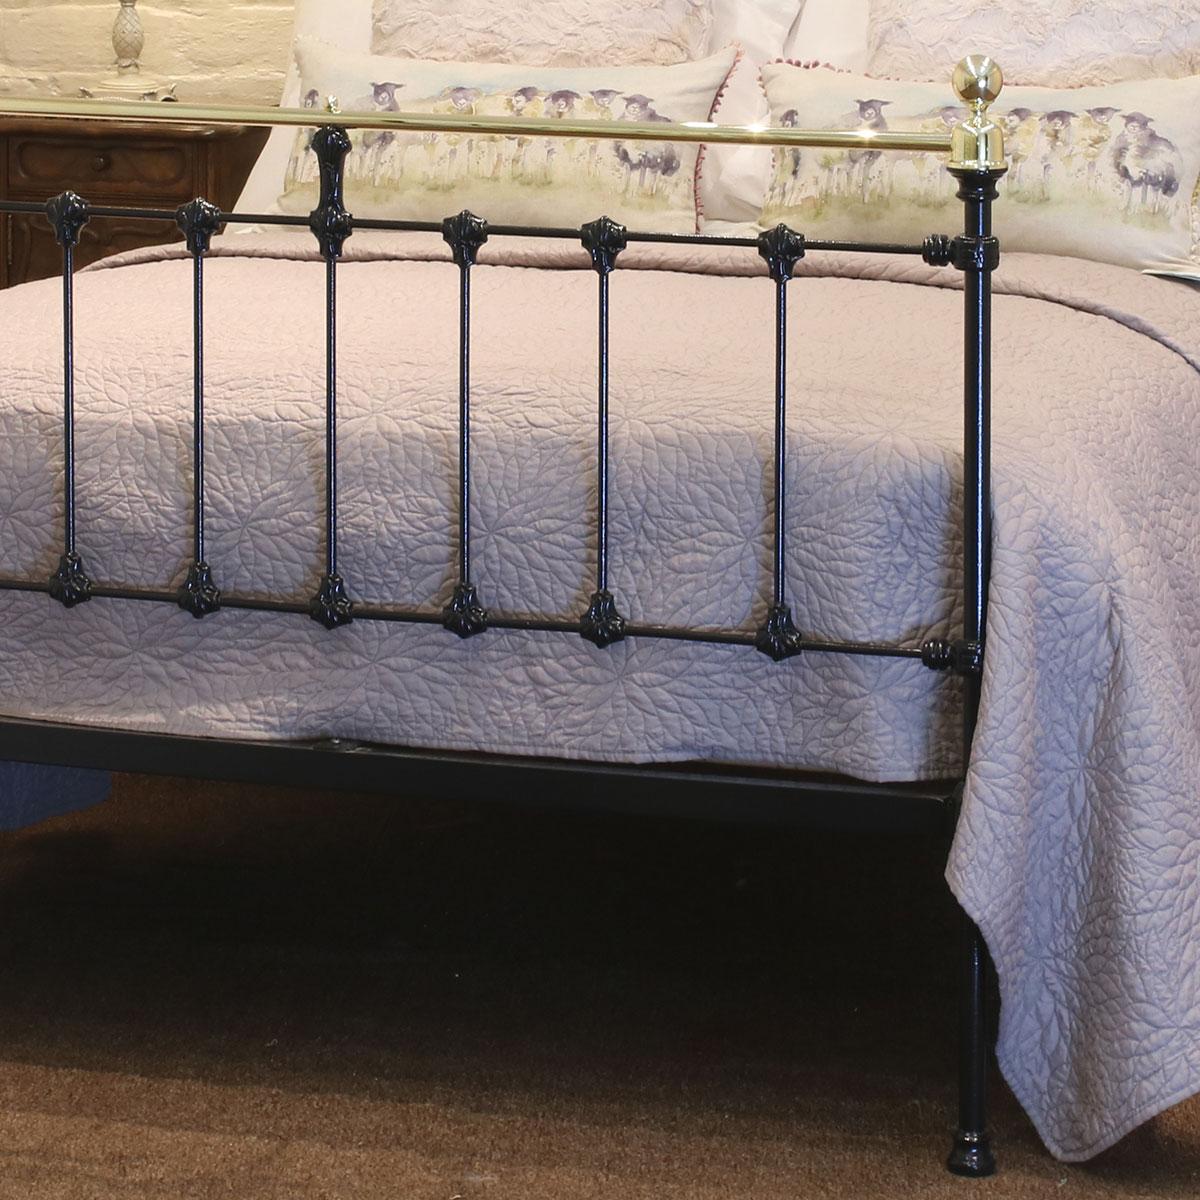 Double Victorian antique bed finished in black with straight top brass rails.

This bed accepts a 4ft 6in wide (54 inch or 135cm) base and mattress.

The price includes a standard firm bed base to support the mattress. 

The mattress bedding and bed